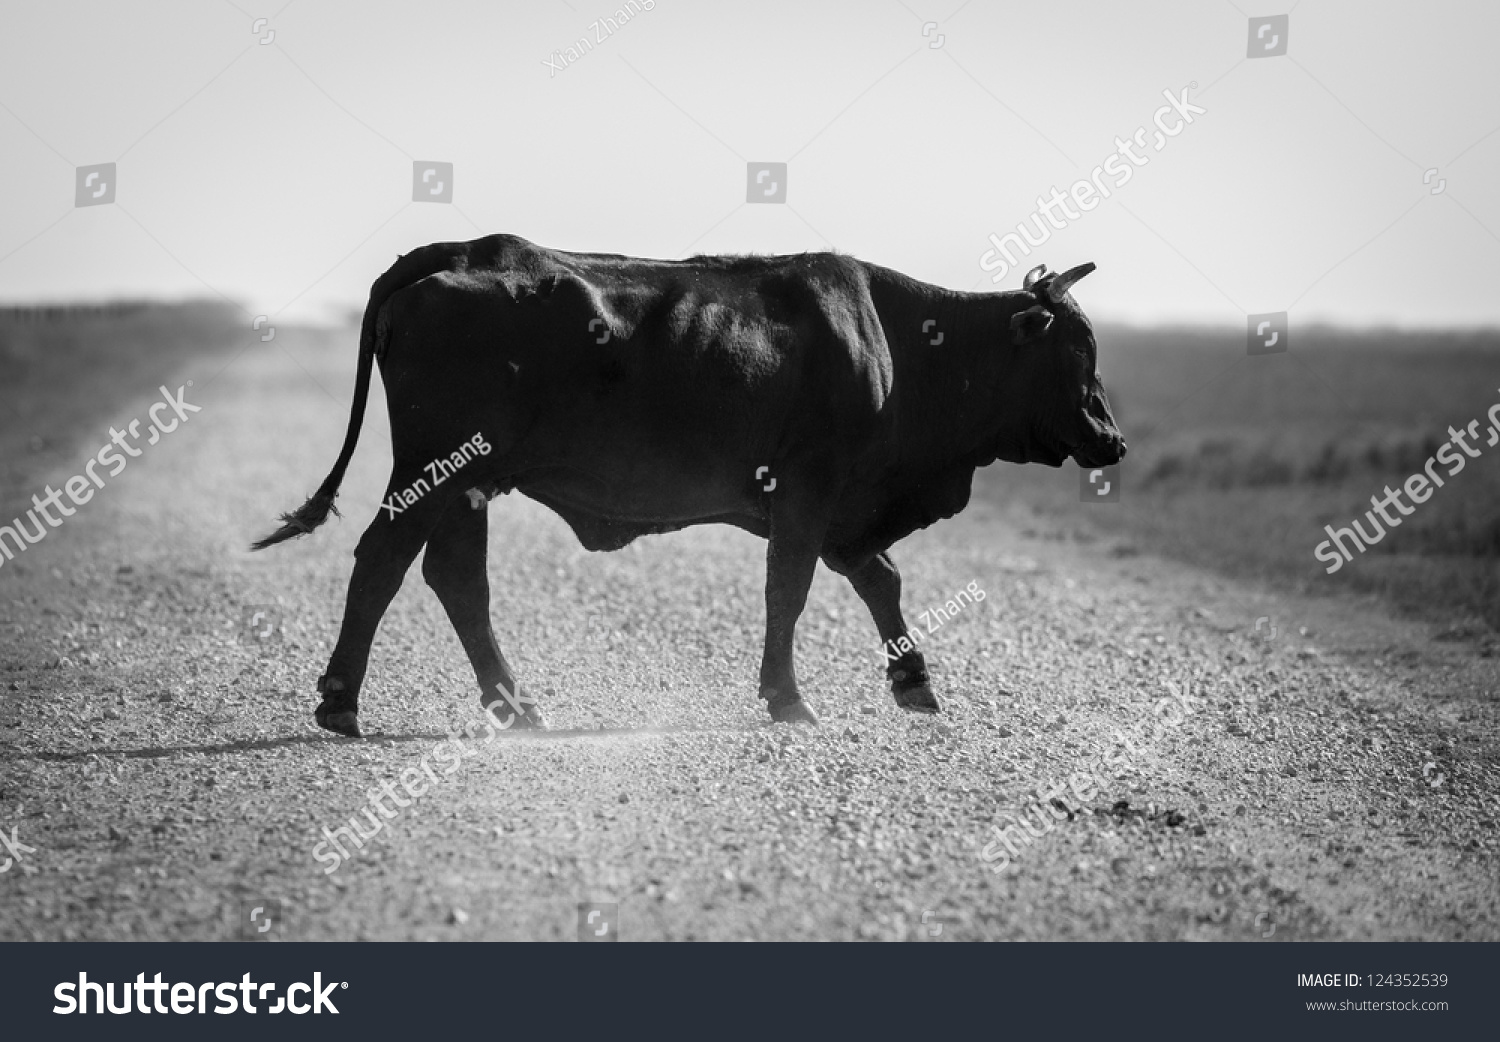 Lonely Bull On Road Stock Photo 124352539 - Shutterstock